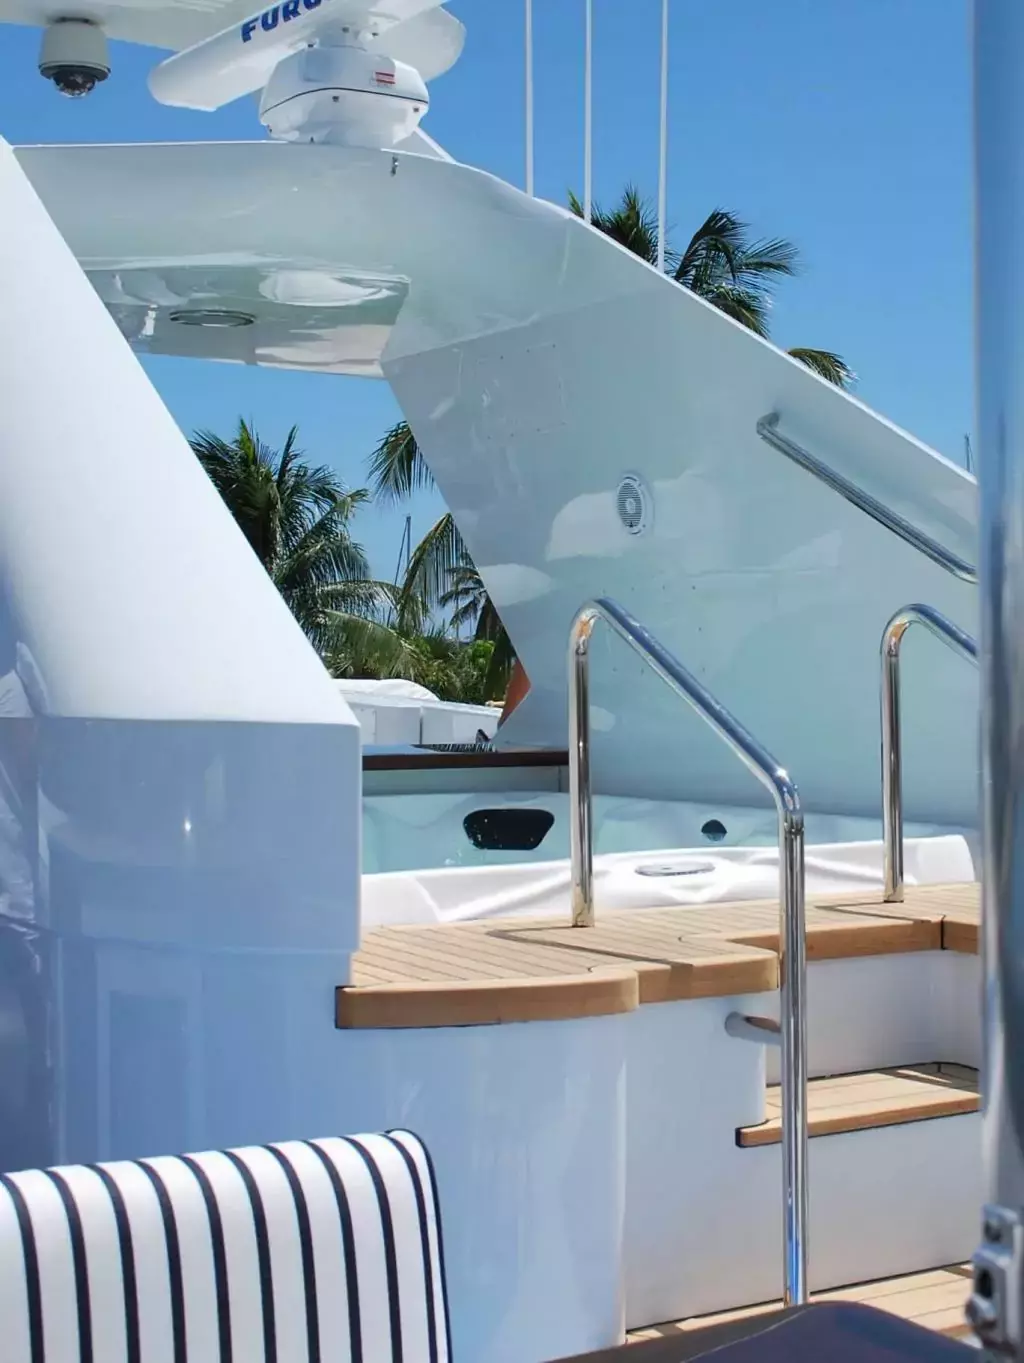 Themis by Trinity Yachts - Top rates for a Charter of a private Superyacht in Cayman Islands